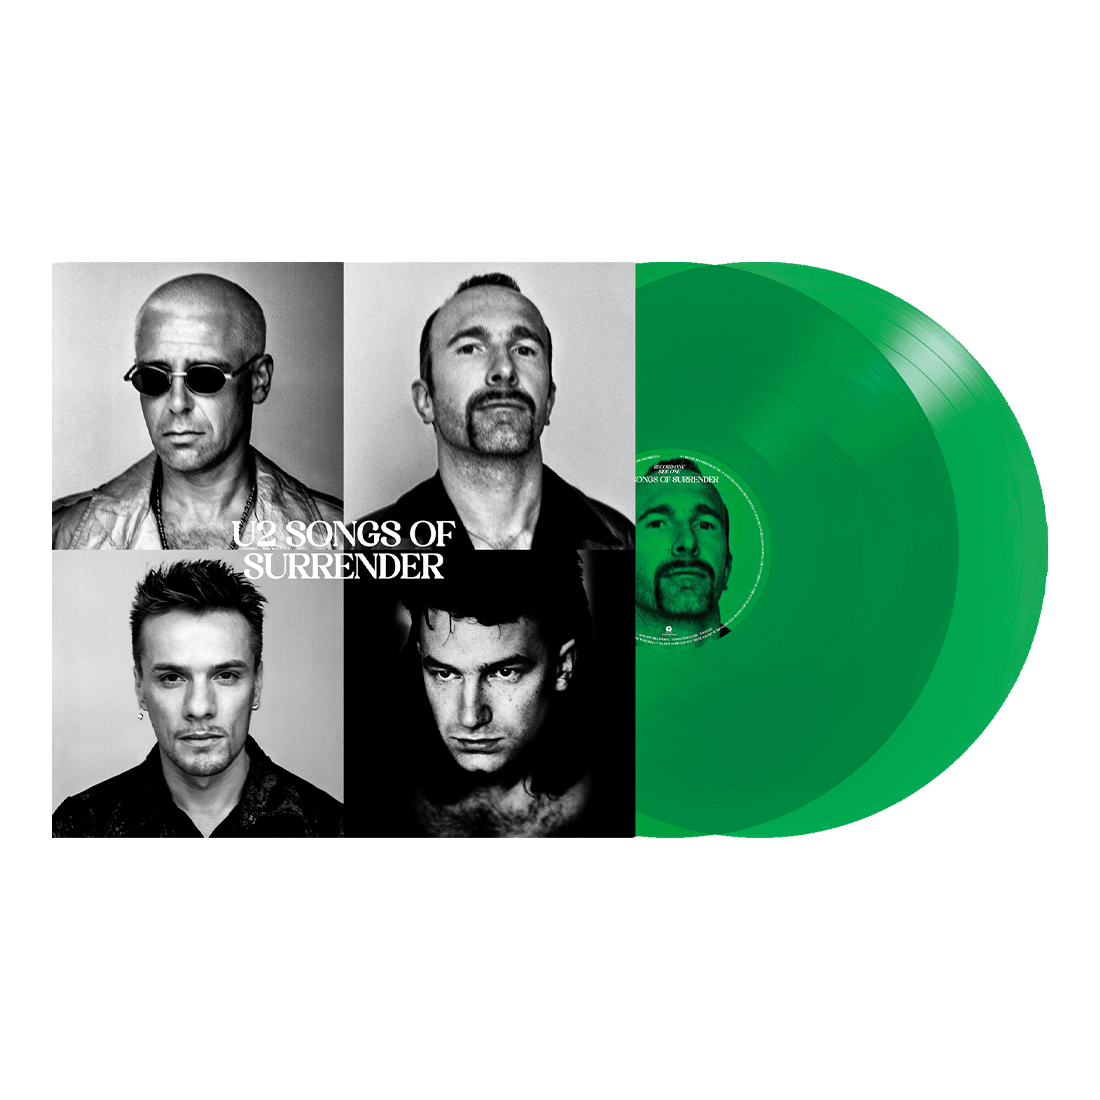 U2 - ‘Songs Of Surrender’ – 2LP Exclusive Transparent Green Vinyl (Limited Edition)